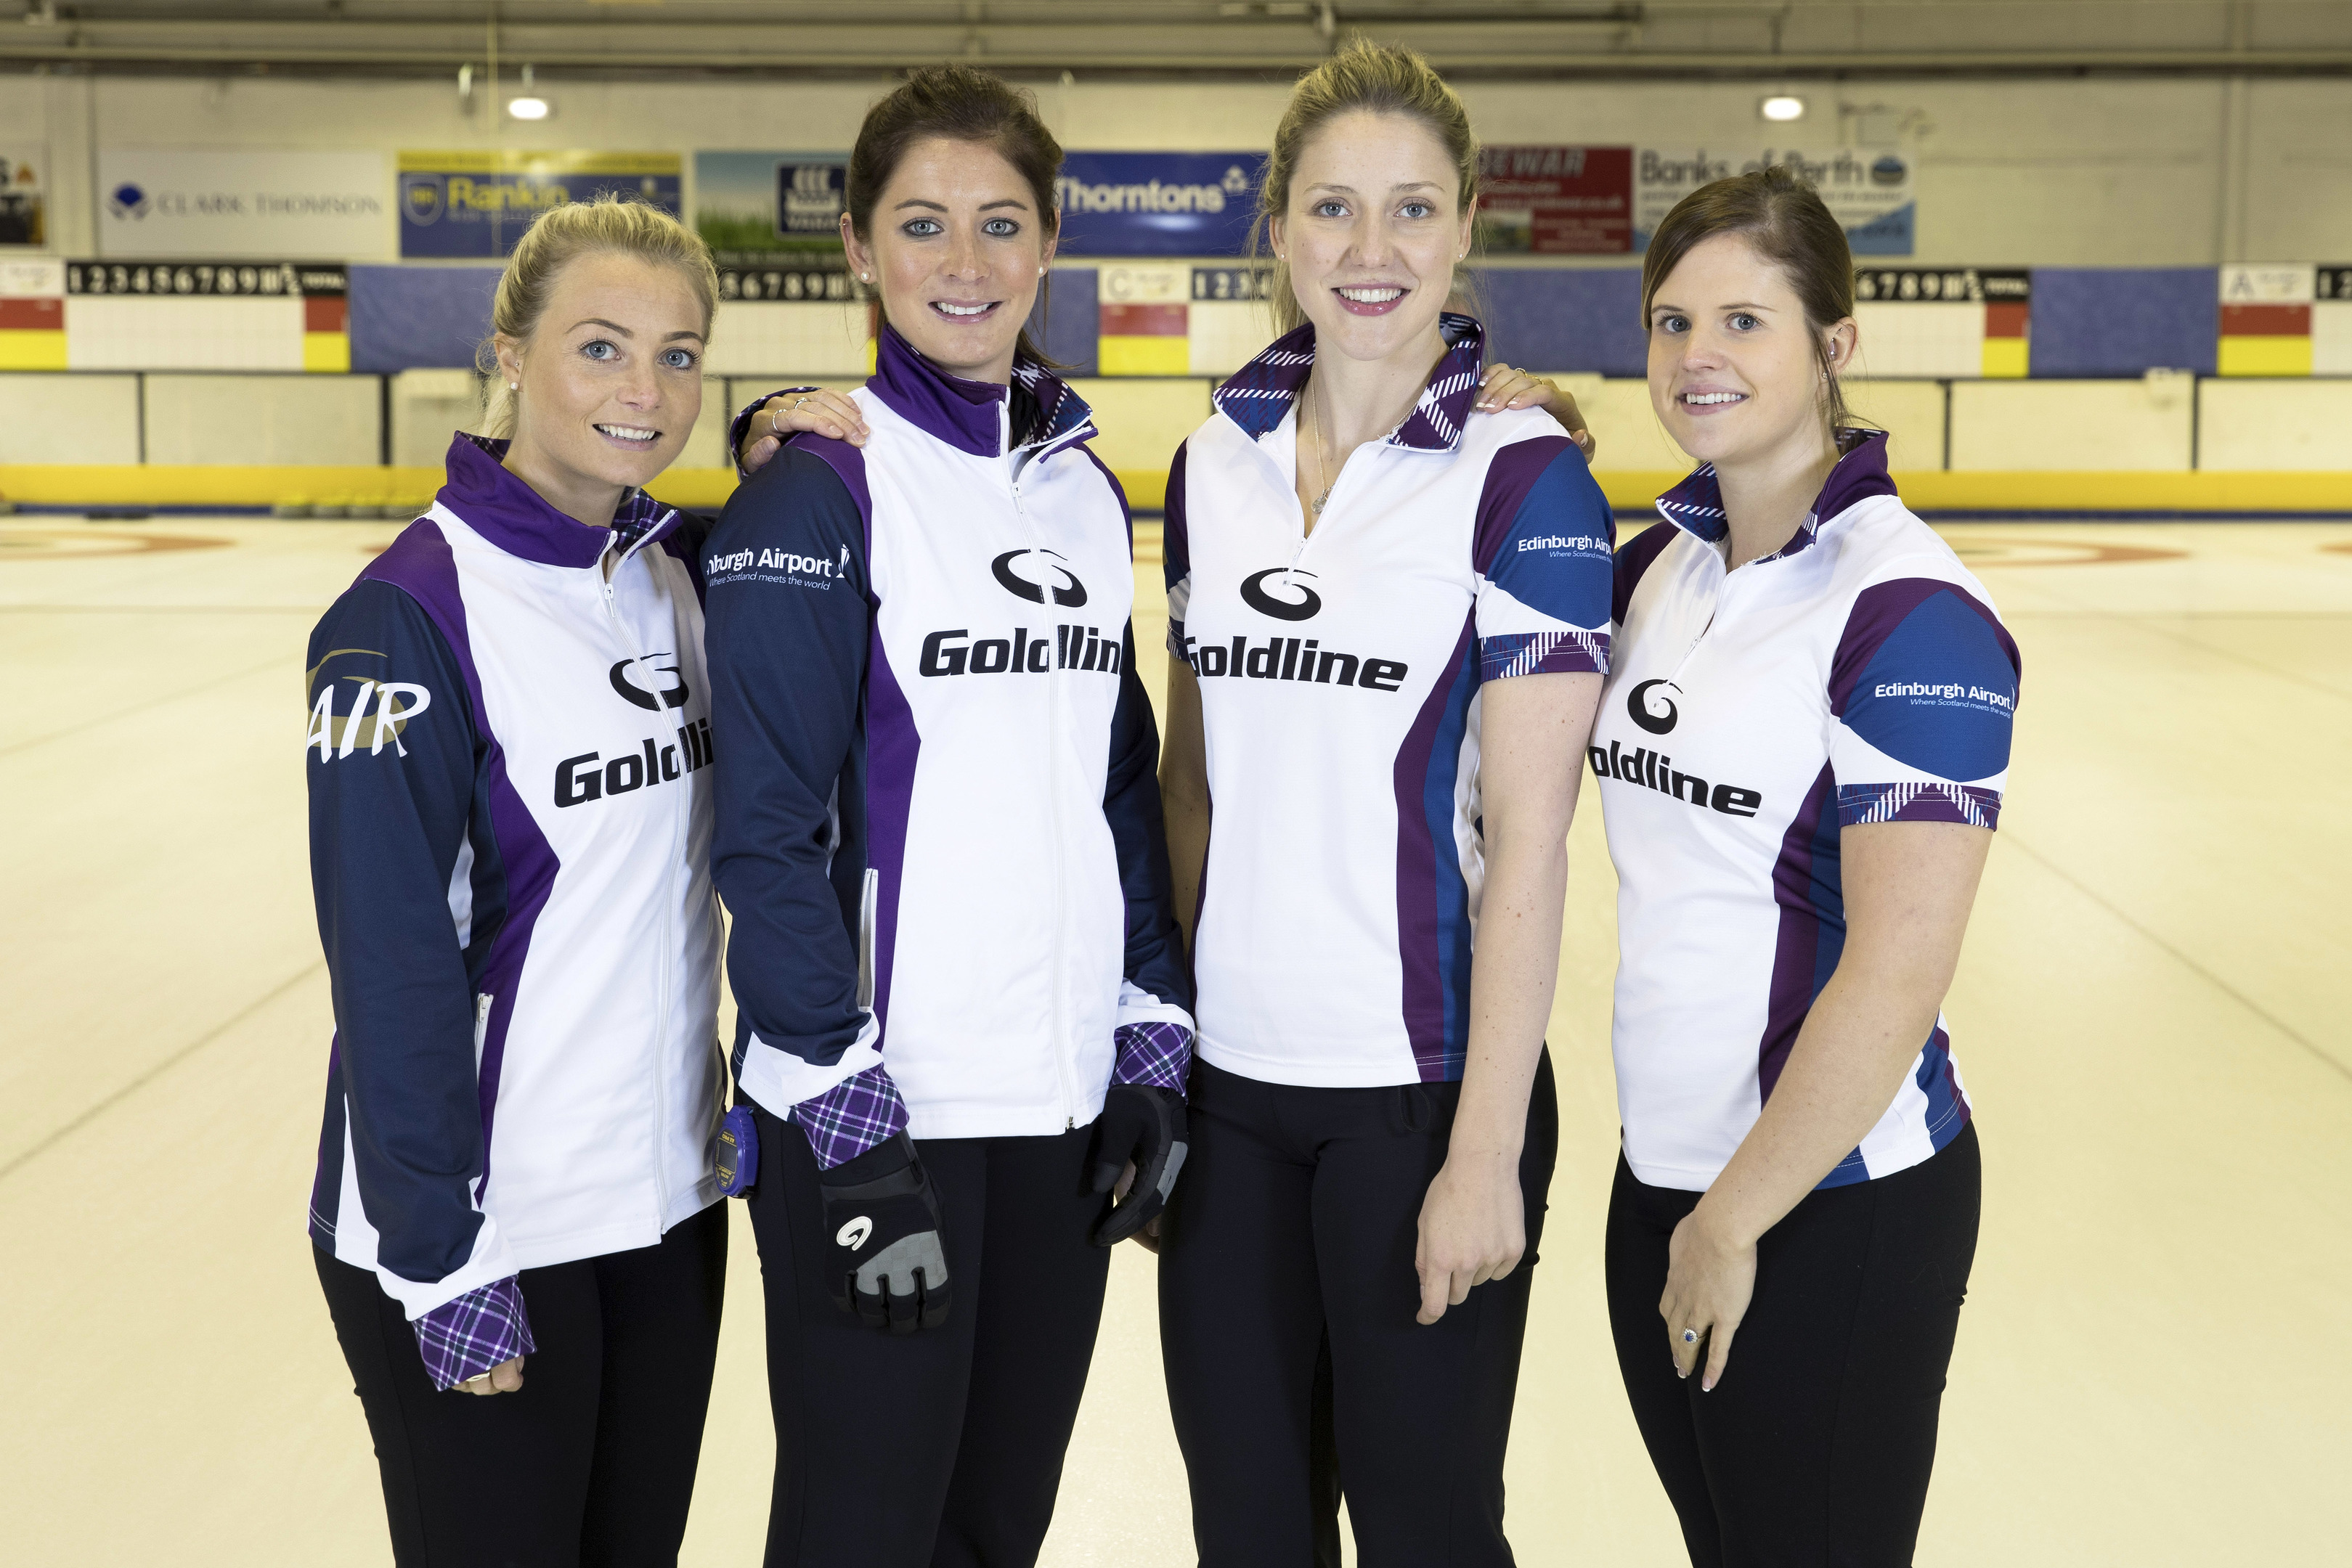 Team Muirhead are ready for the European Championships at Braehead.